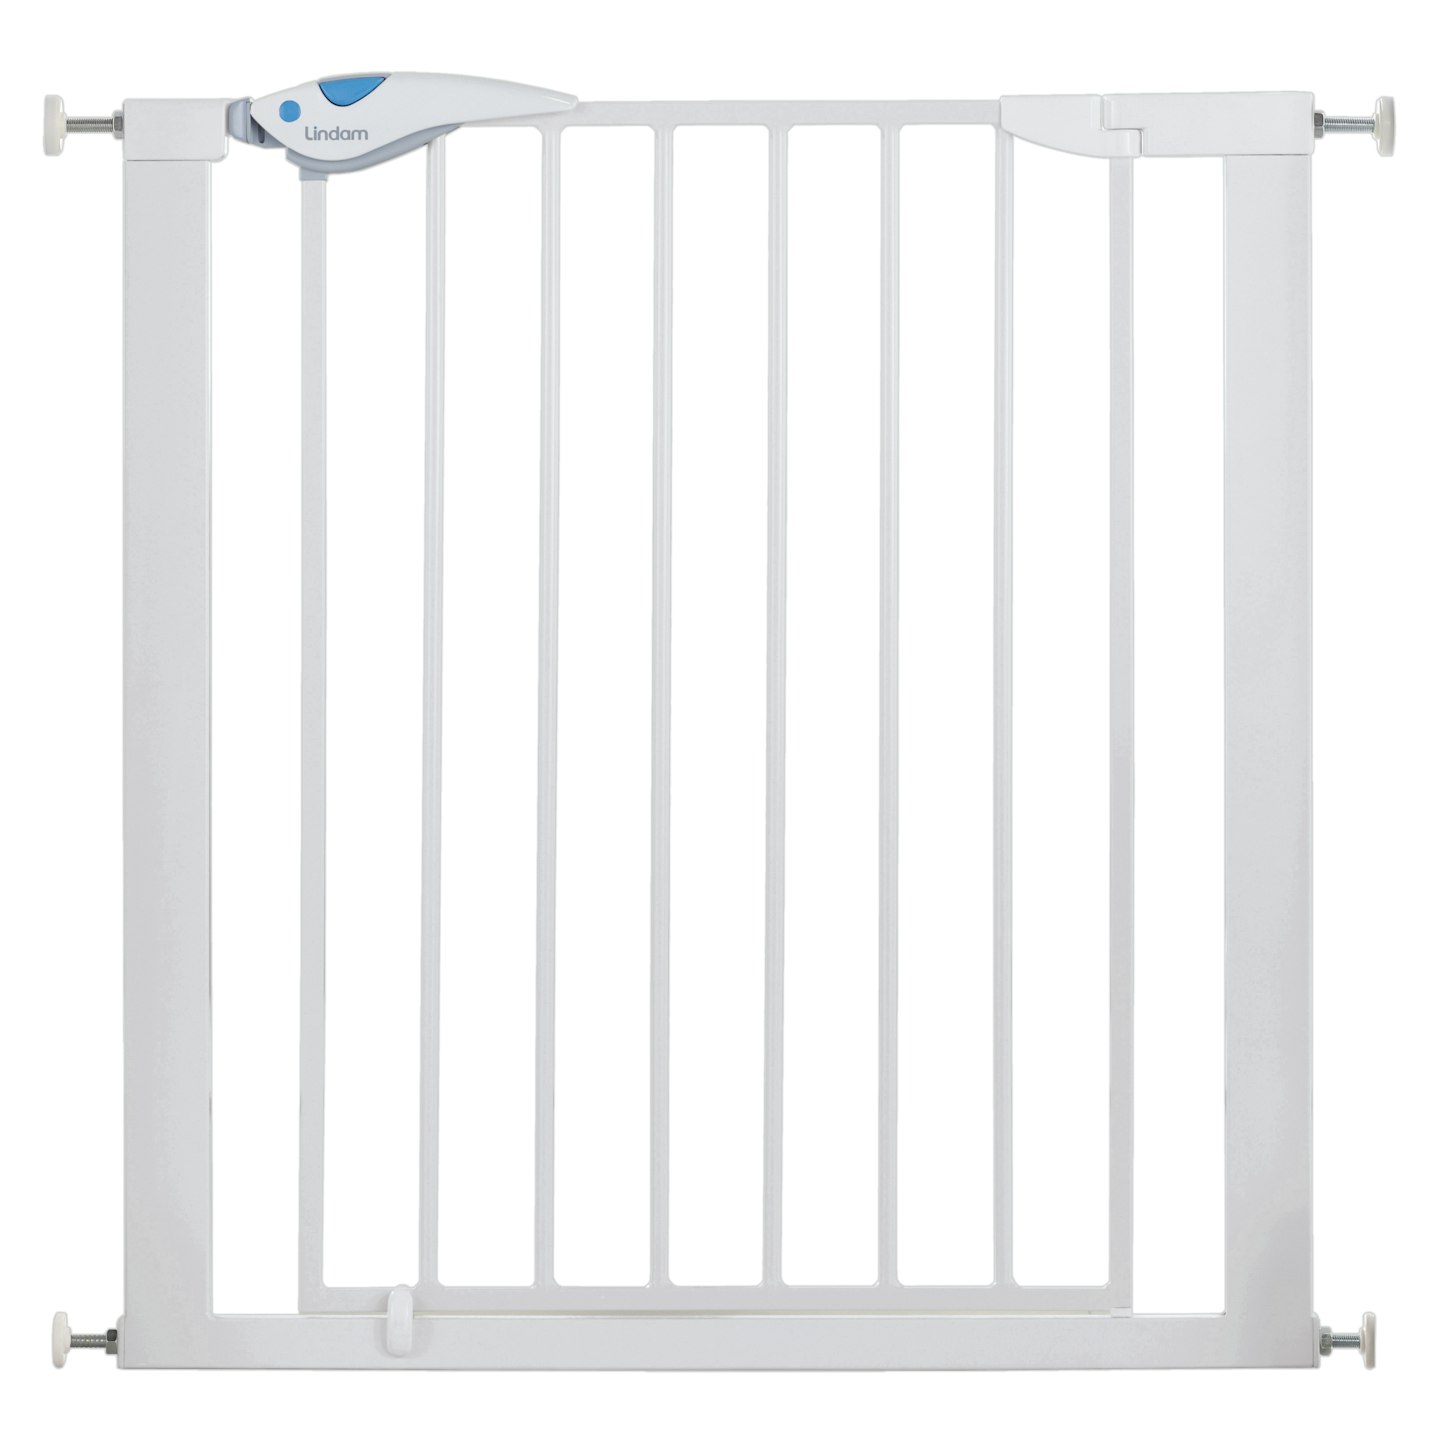 Lindam Easy Fit Plus Deluxe Safety Gate review